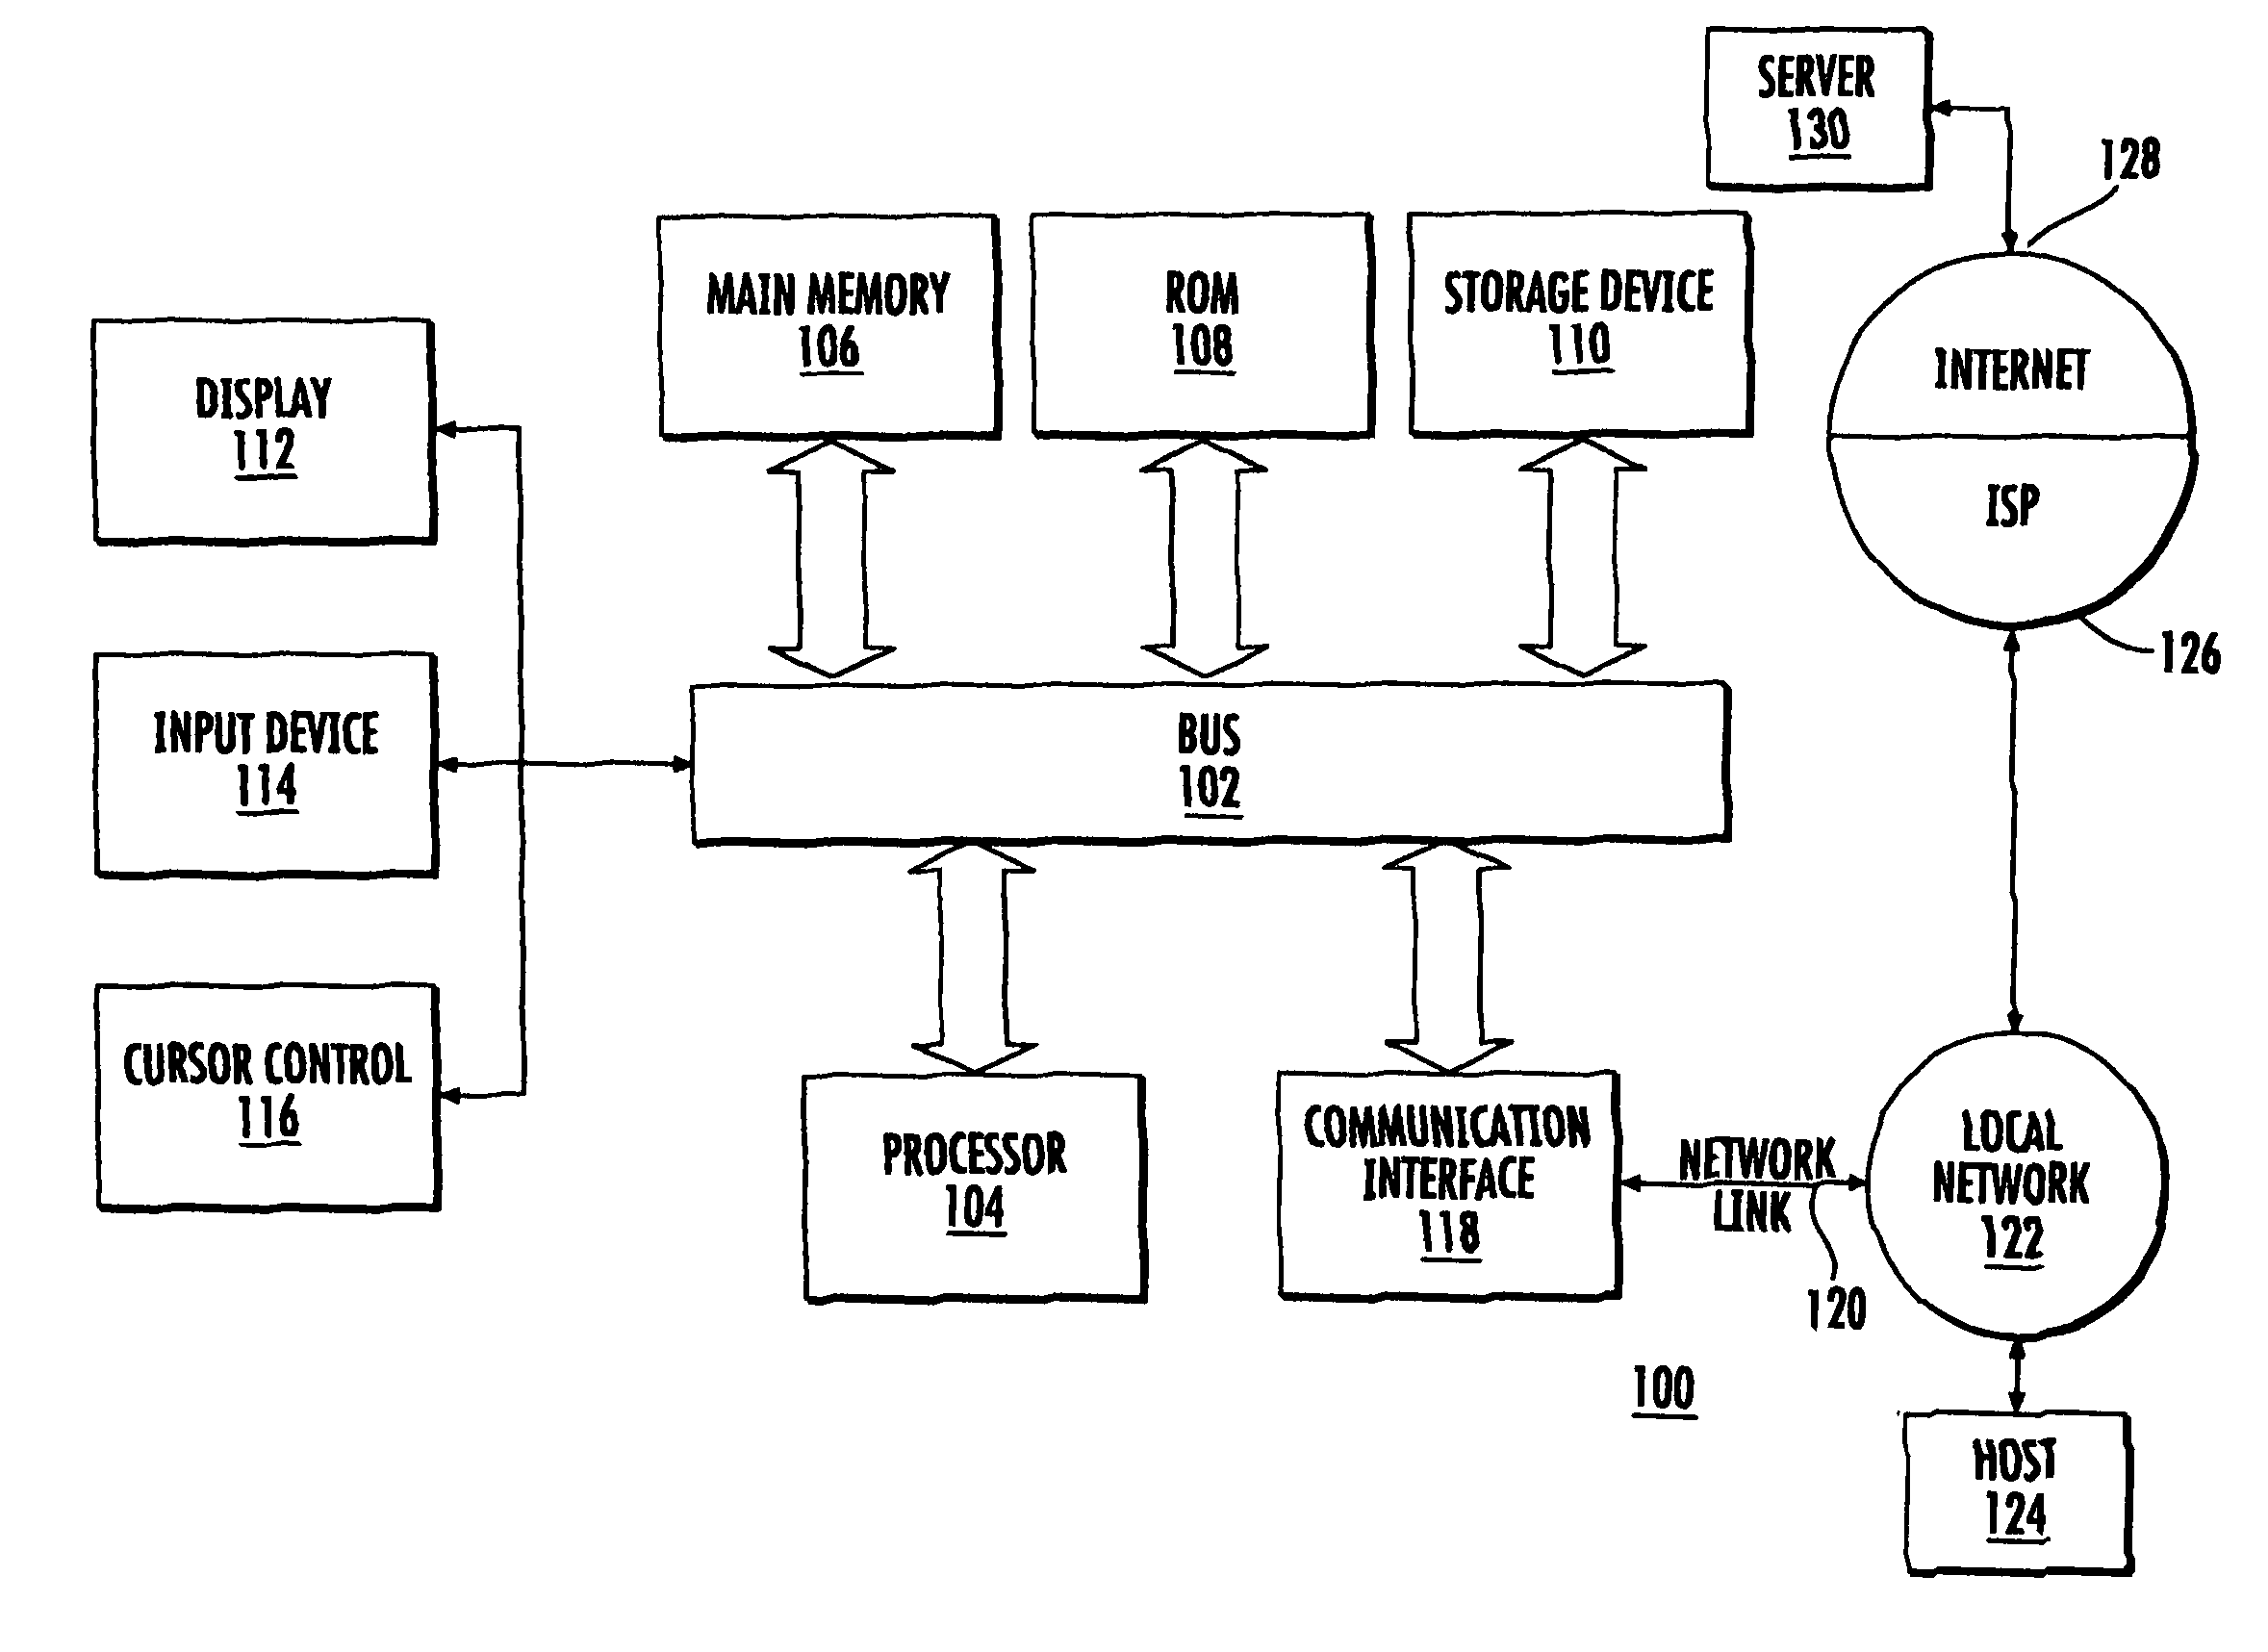 Method of Simulation Reproductive Creatures